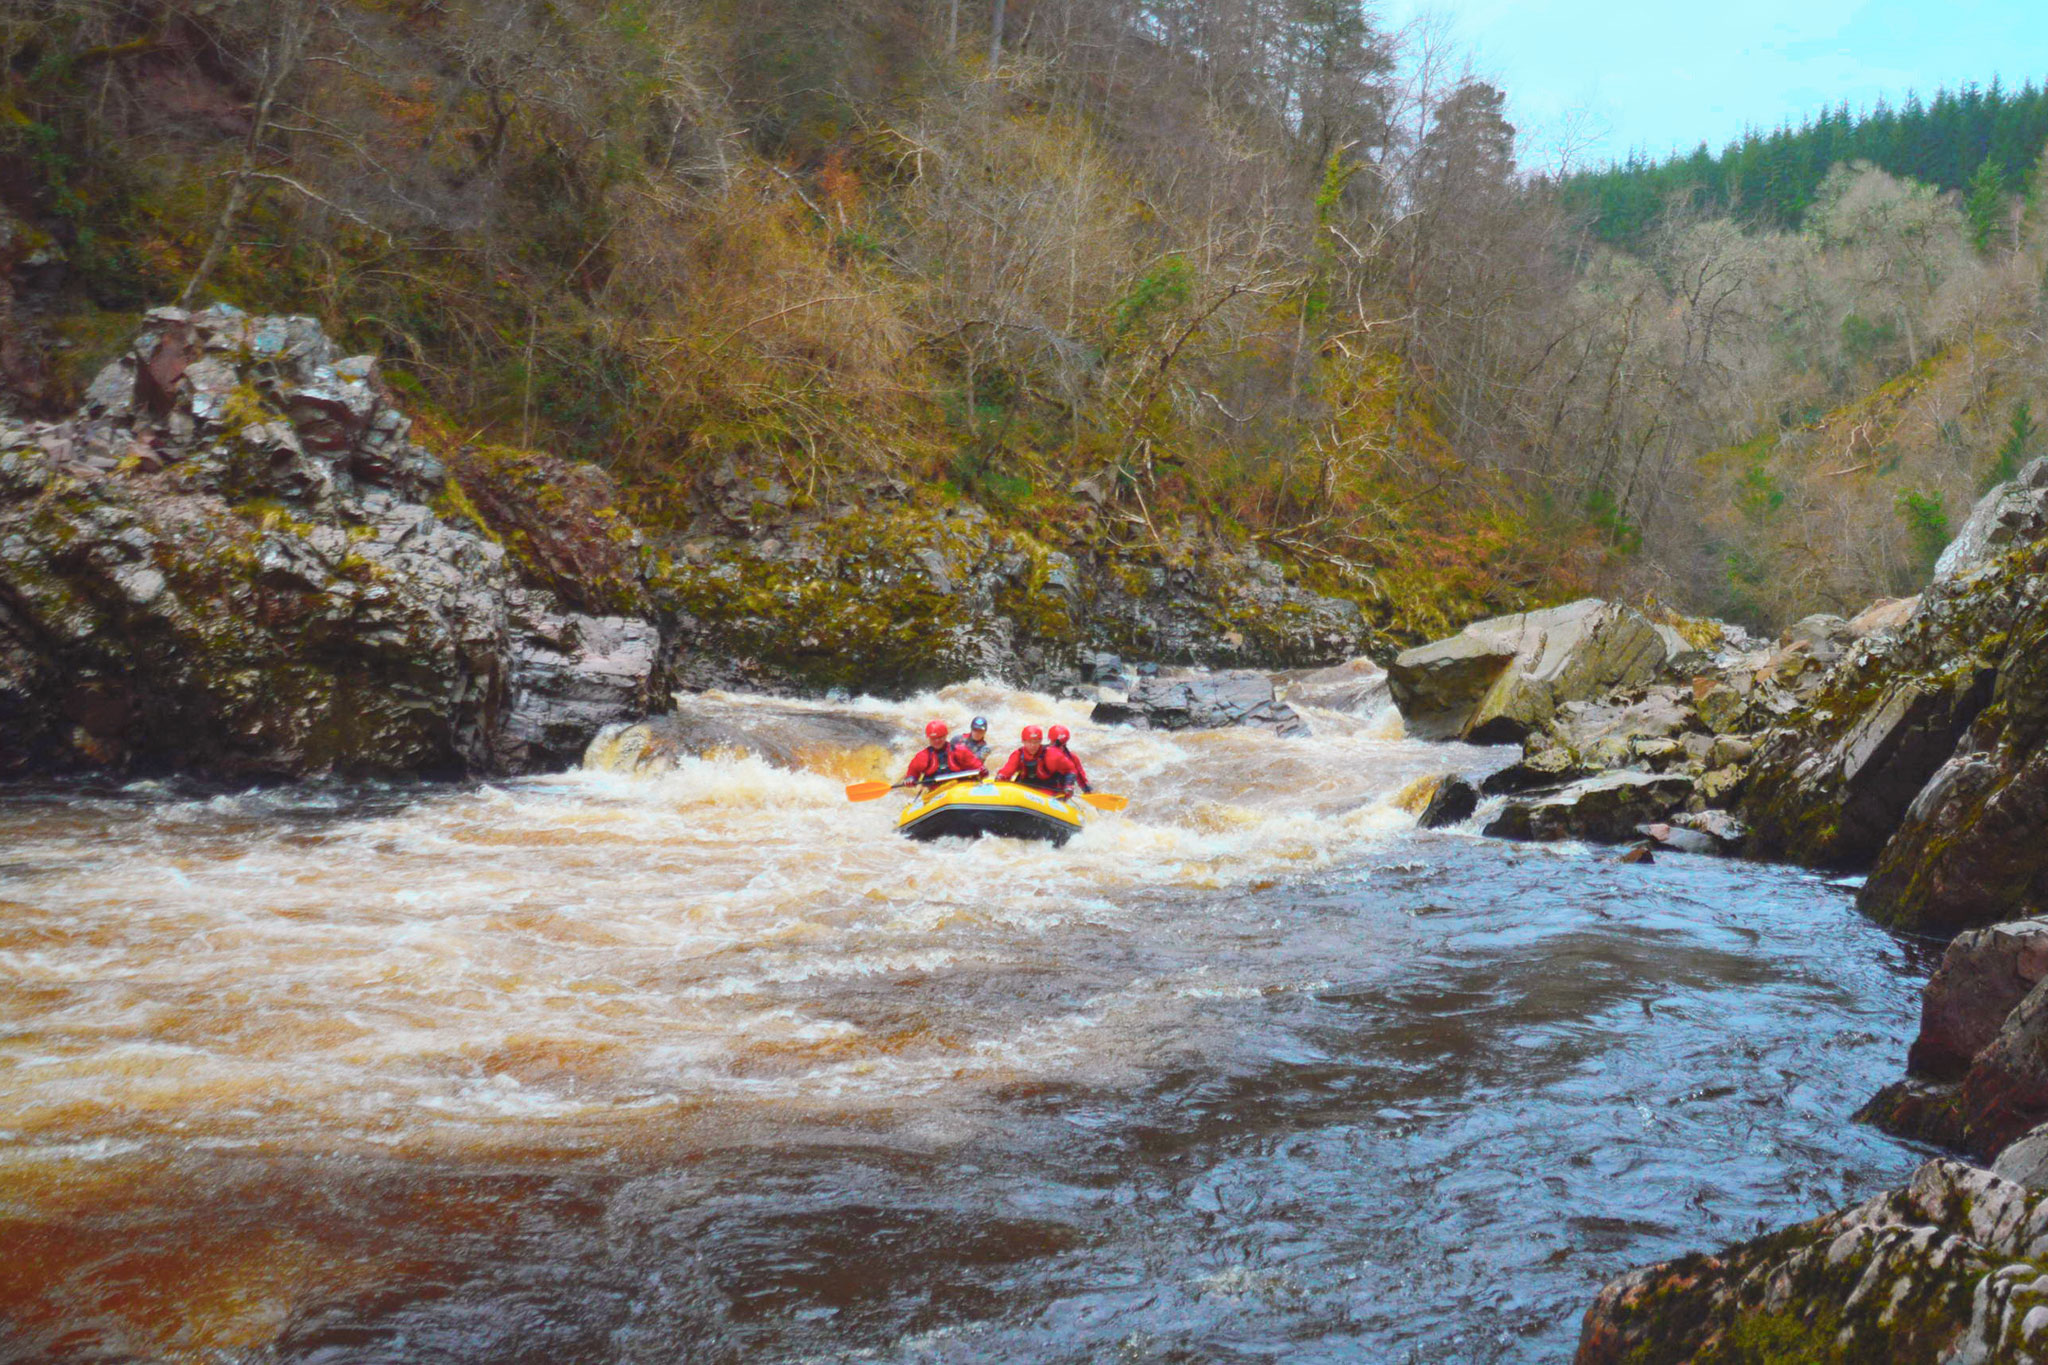 Join us on the River Findhorn for a White Water Rafting experience to remember